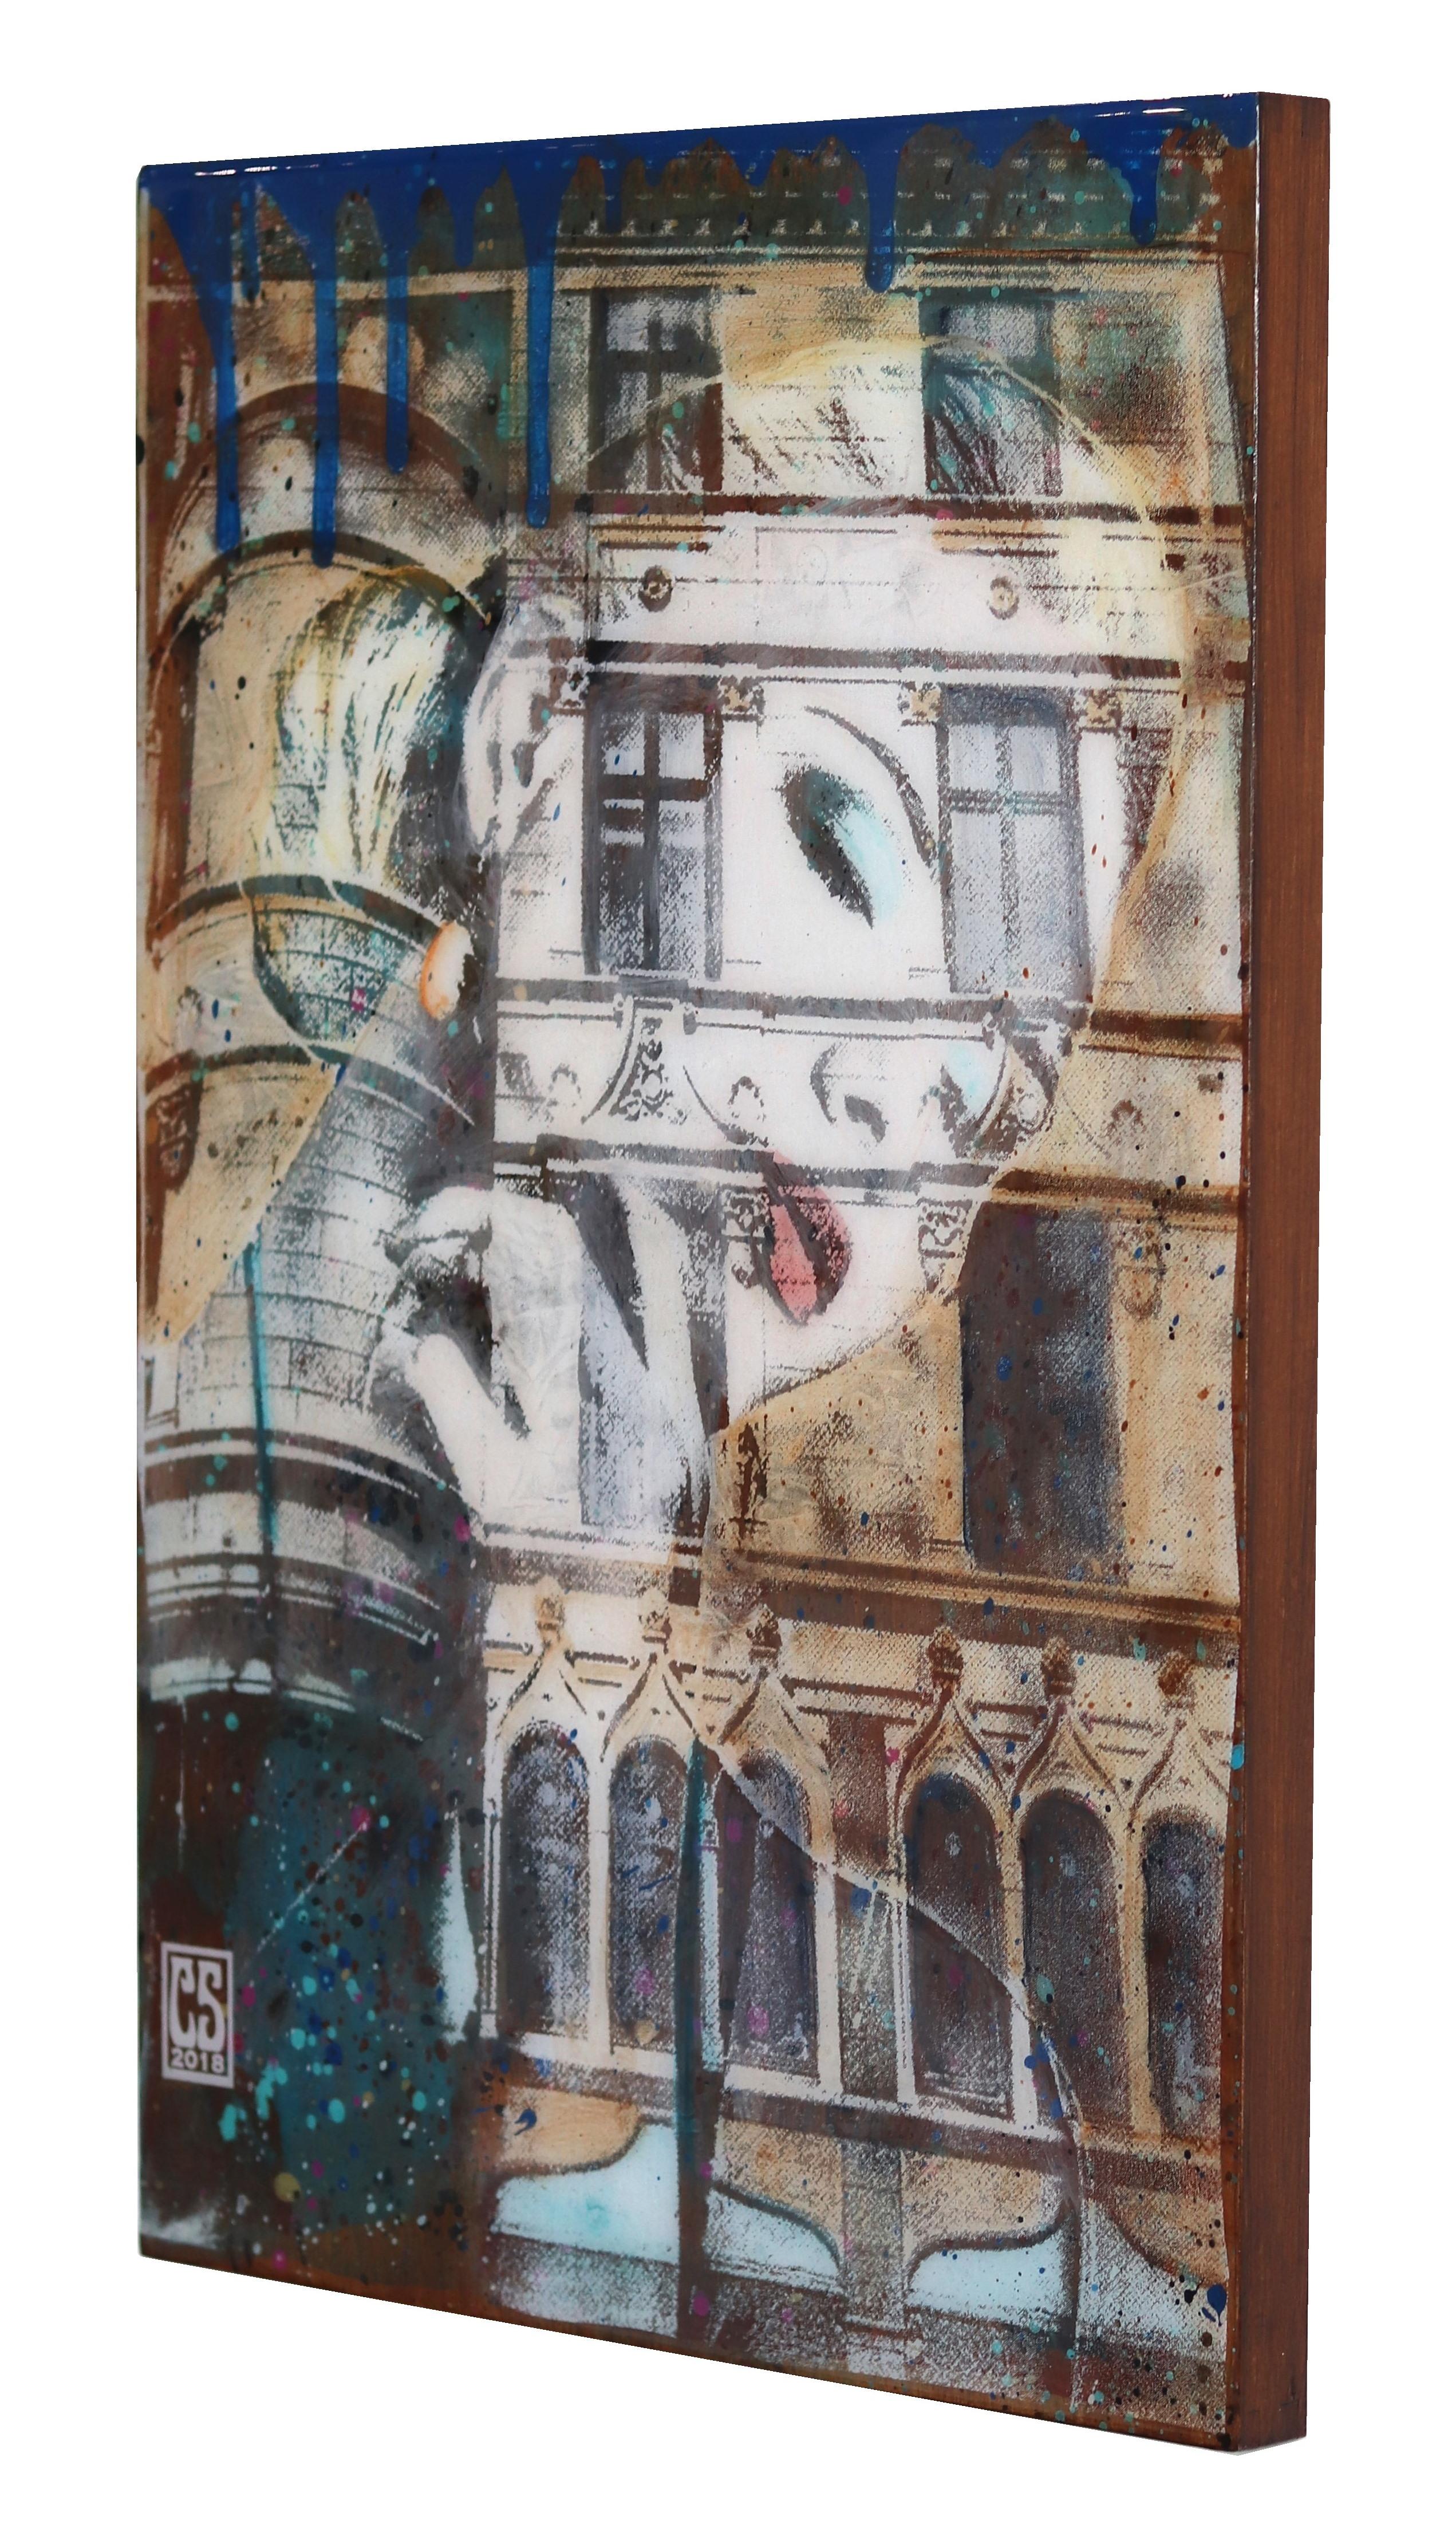 Svelte Reflection - Figurative Abstract Contemporary City Woman Resin Painting - Pop Art Mixed Media Art by Carl Smith